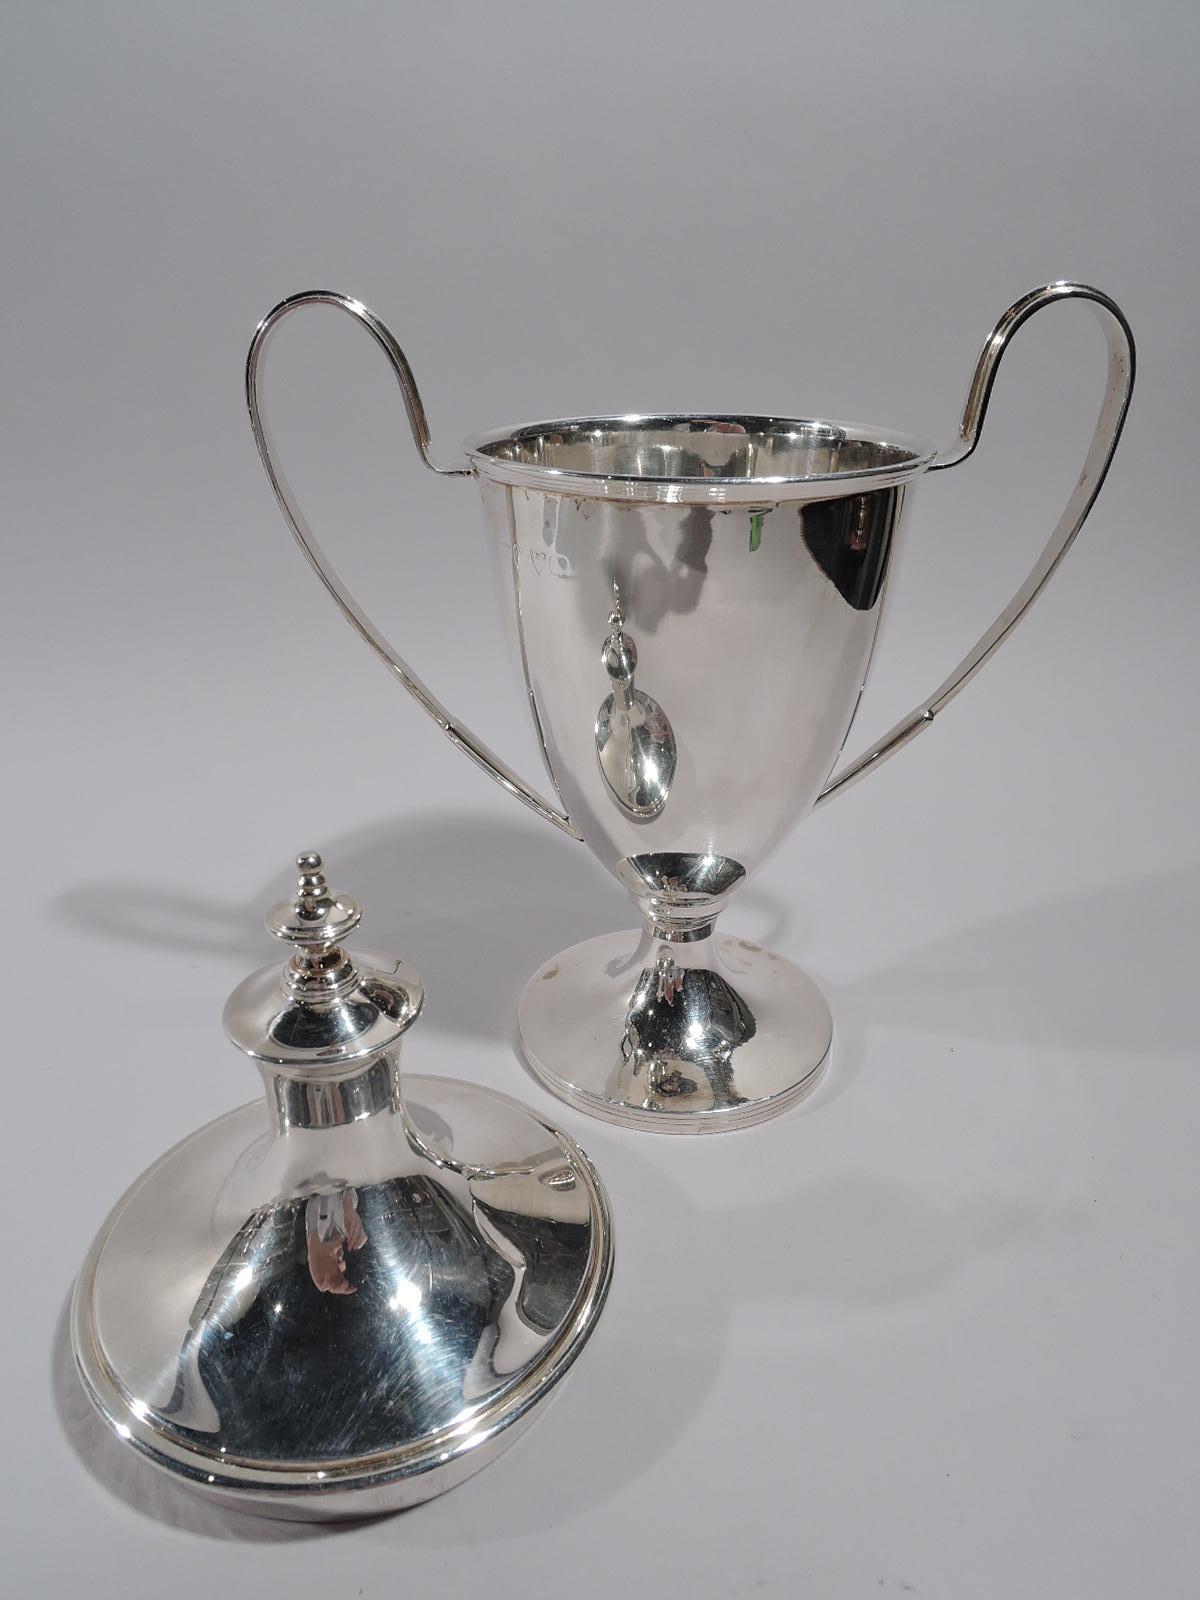 English sterling silver trophy cup, circa 1920. Urn with high-looping sides handles and raised foot. Cover domed with vase finial. Smallish. Traditional form. Fully marked including maker (Barker Bros) and assay (Chester) stamps, and worn date